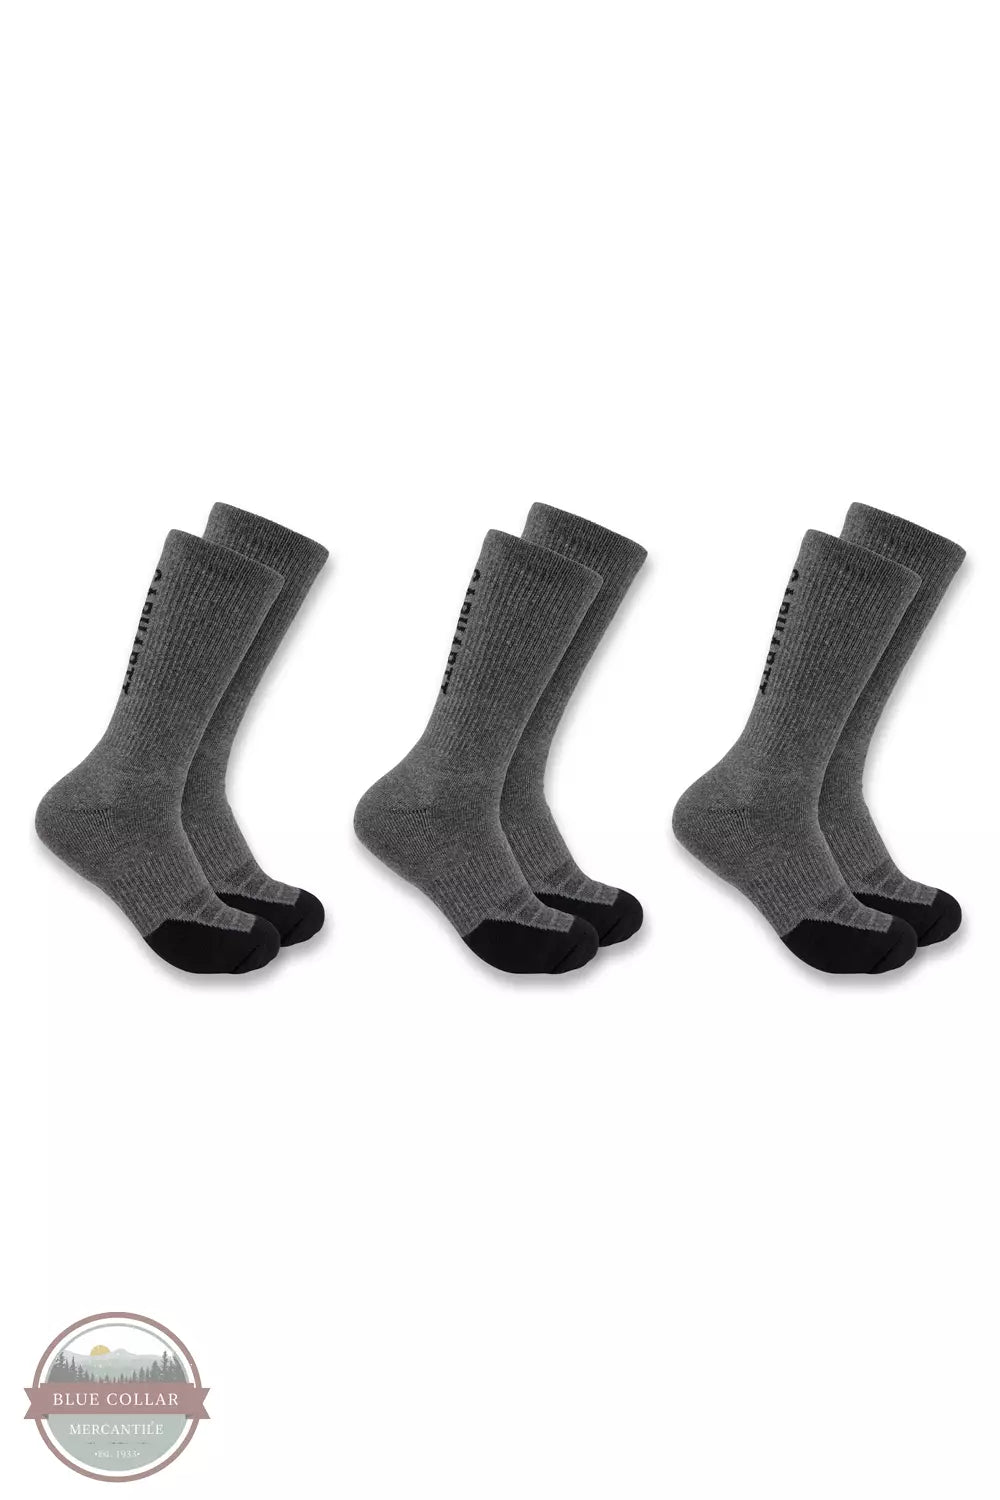 Carhartt SC9913M Force® Midweight Logo Crew Socks 3-Pack Carbon Heather Side View